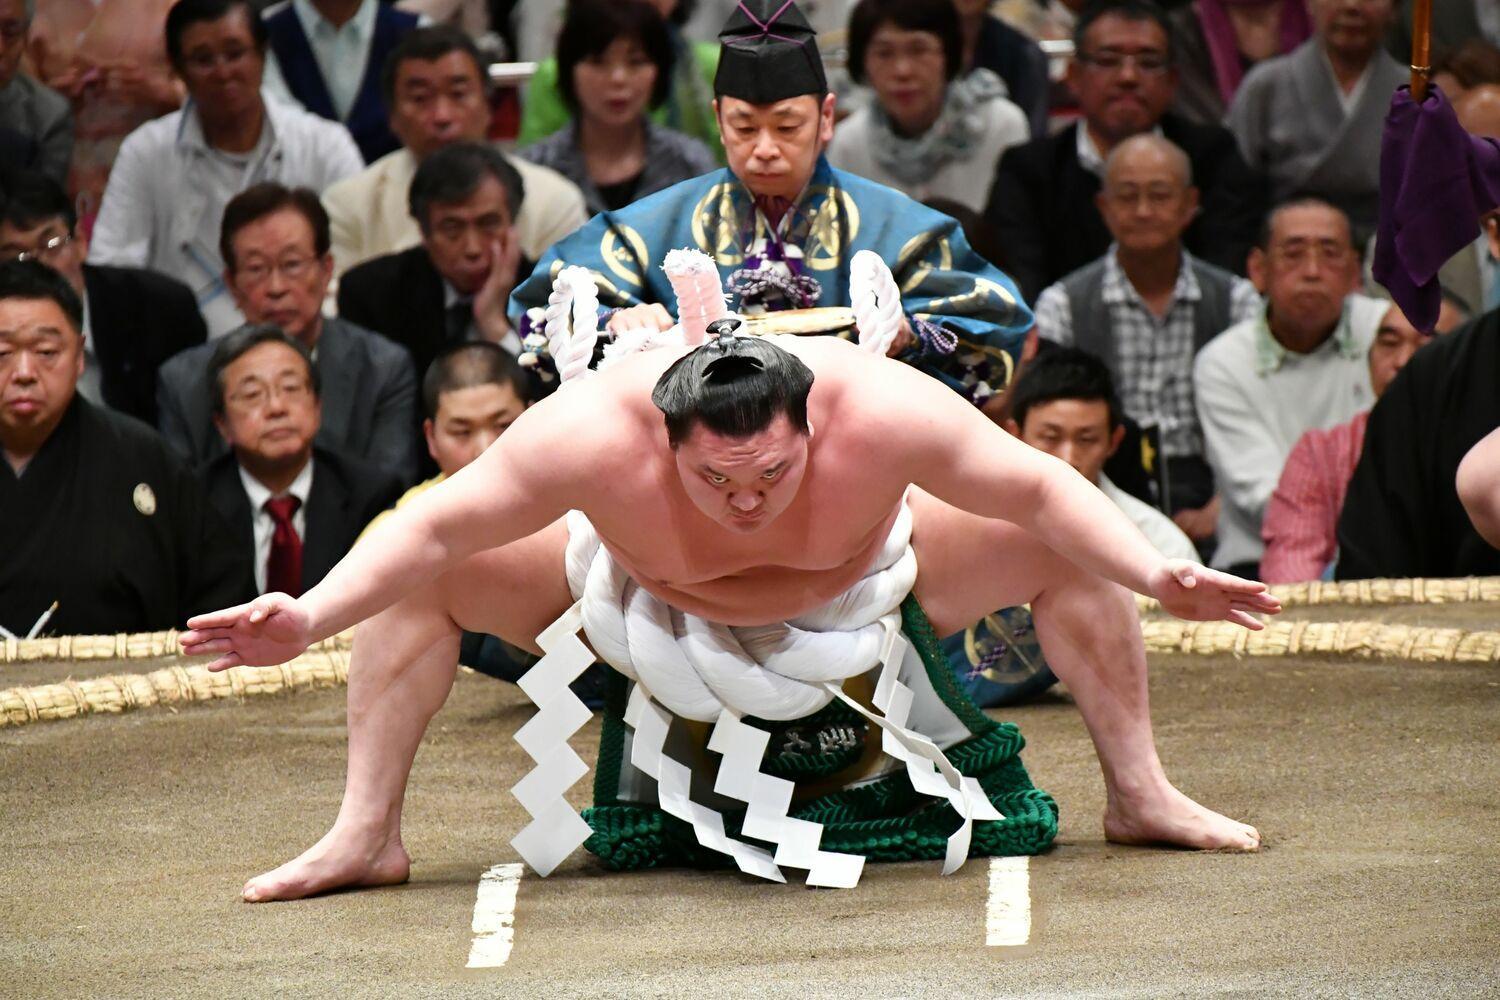 Amazing Facts to Know About Sumo Wrestling - Things To Do in Tokyo